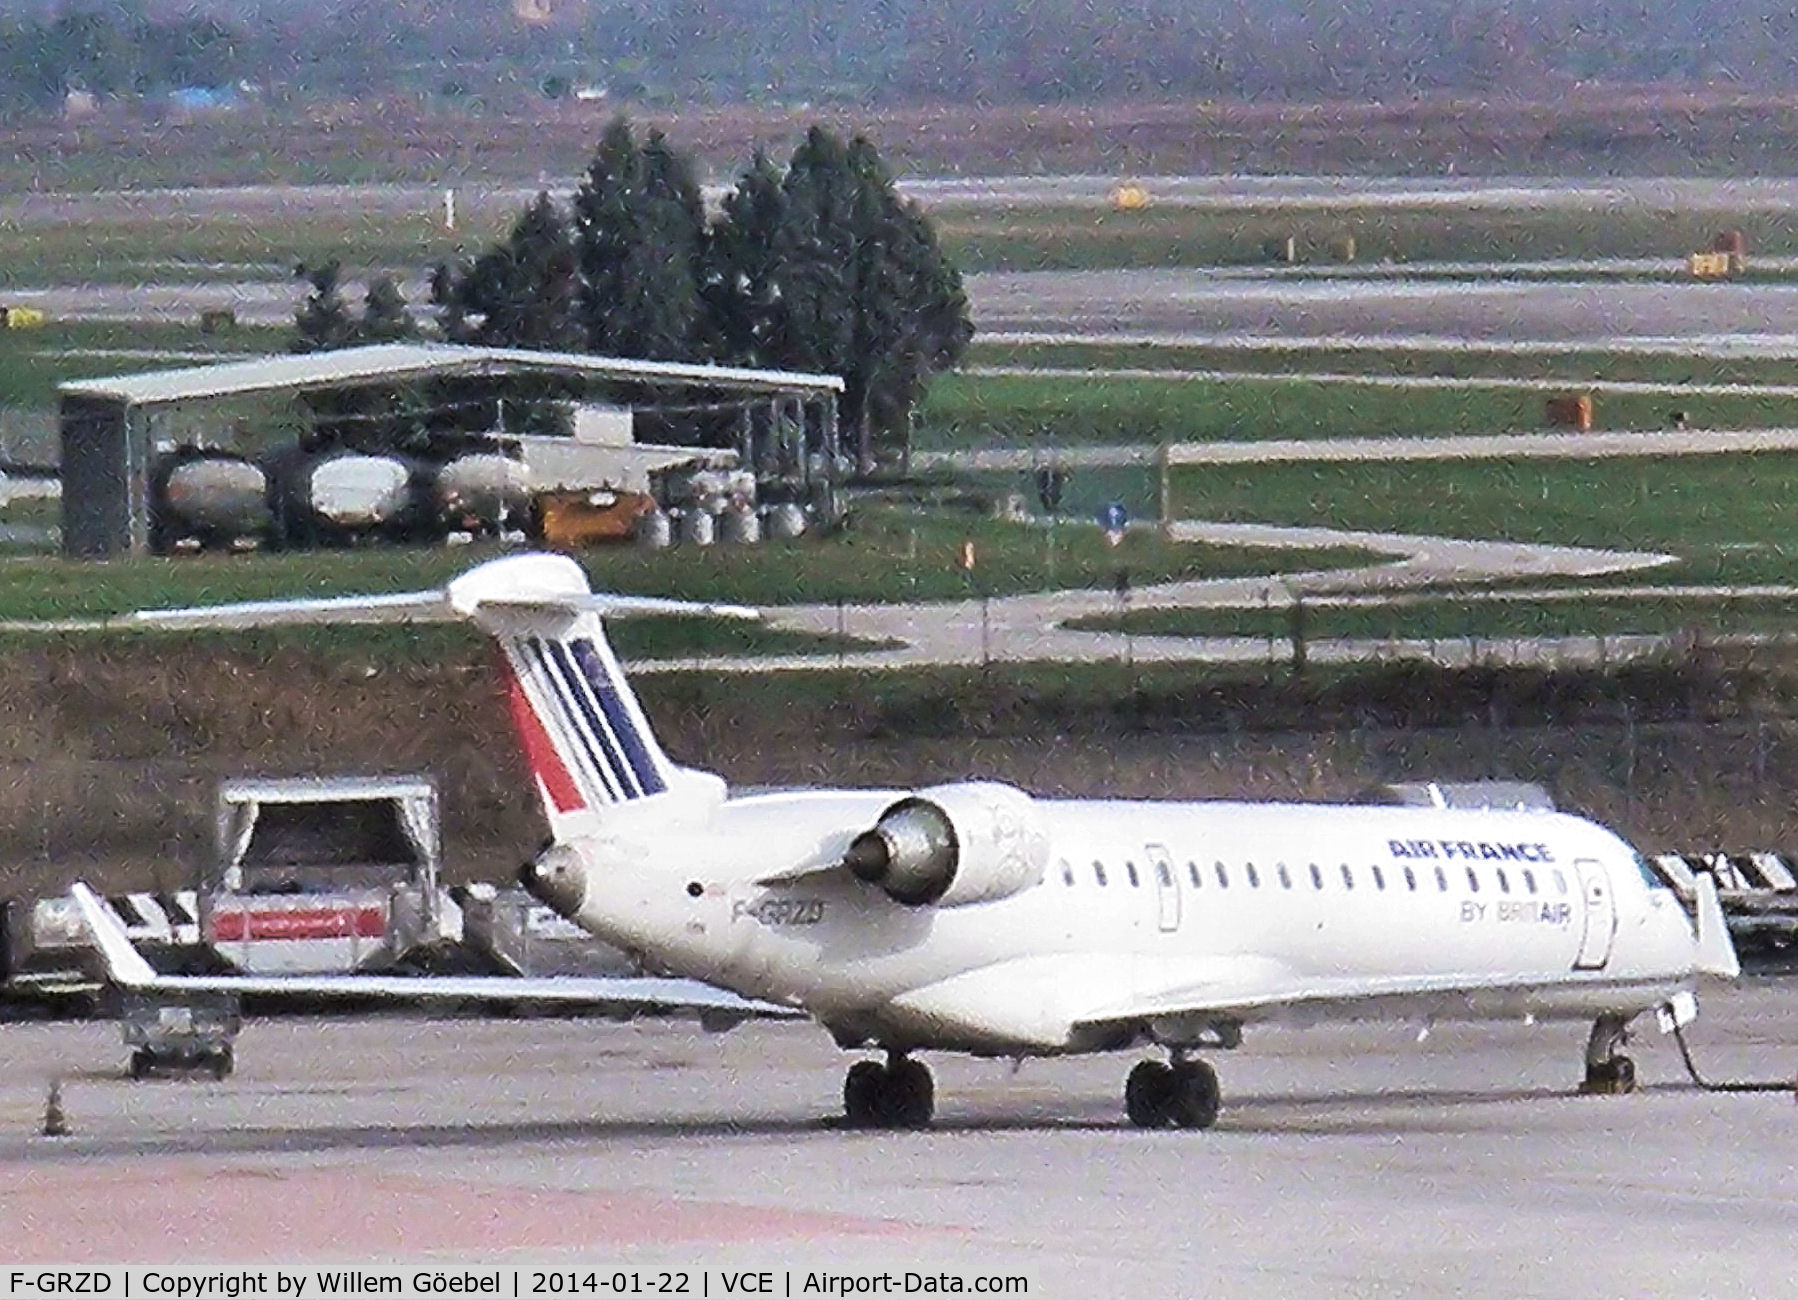 F-GRZD, 2001 Canadair CRJ-702 (CL-600-2C10) Regional Jet C/N 10016, Parking on the platform of Marco Polo Airport